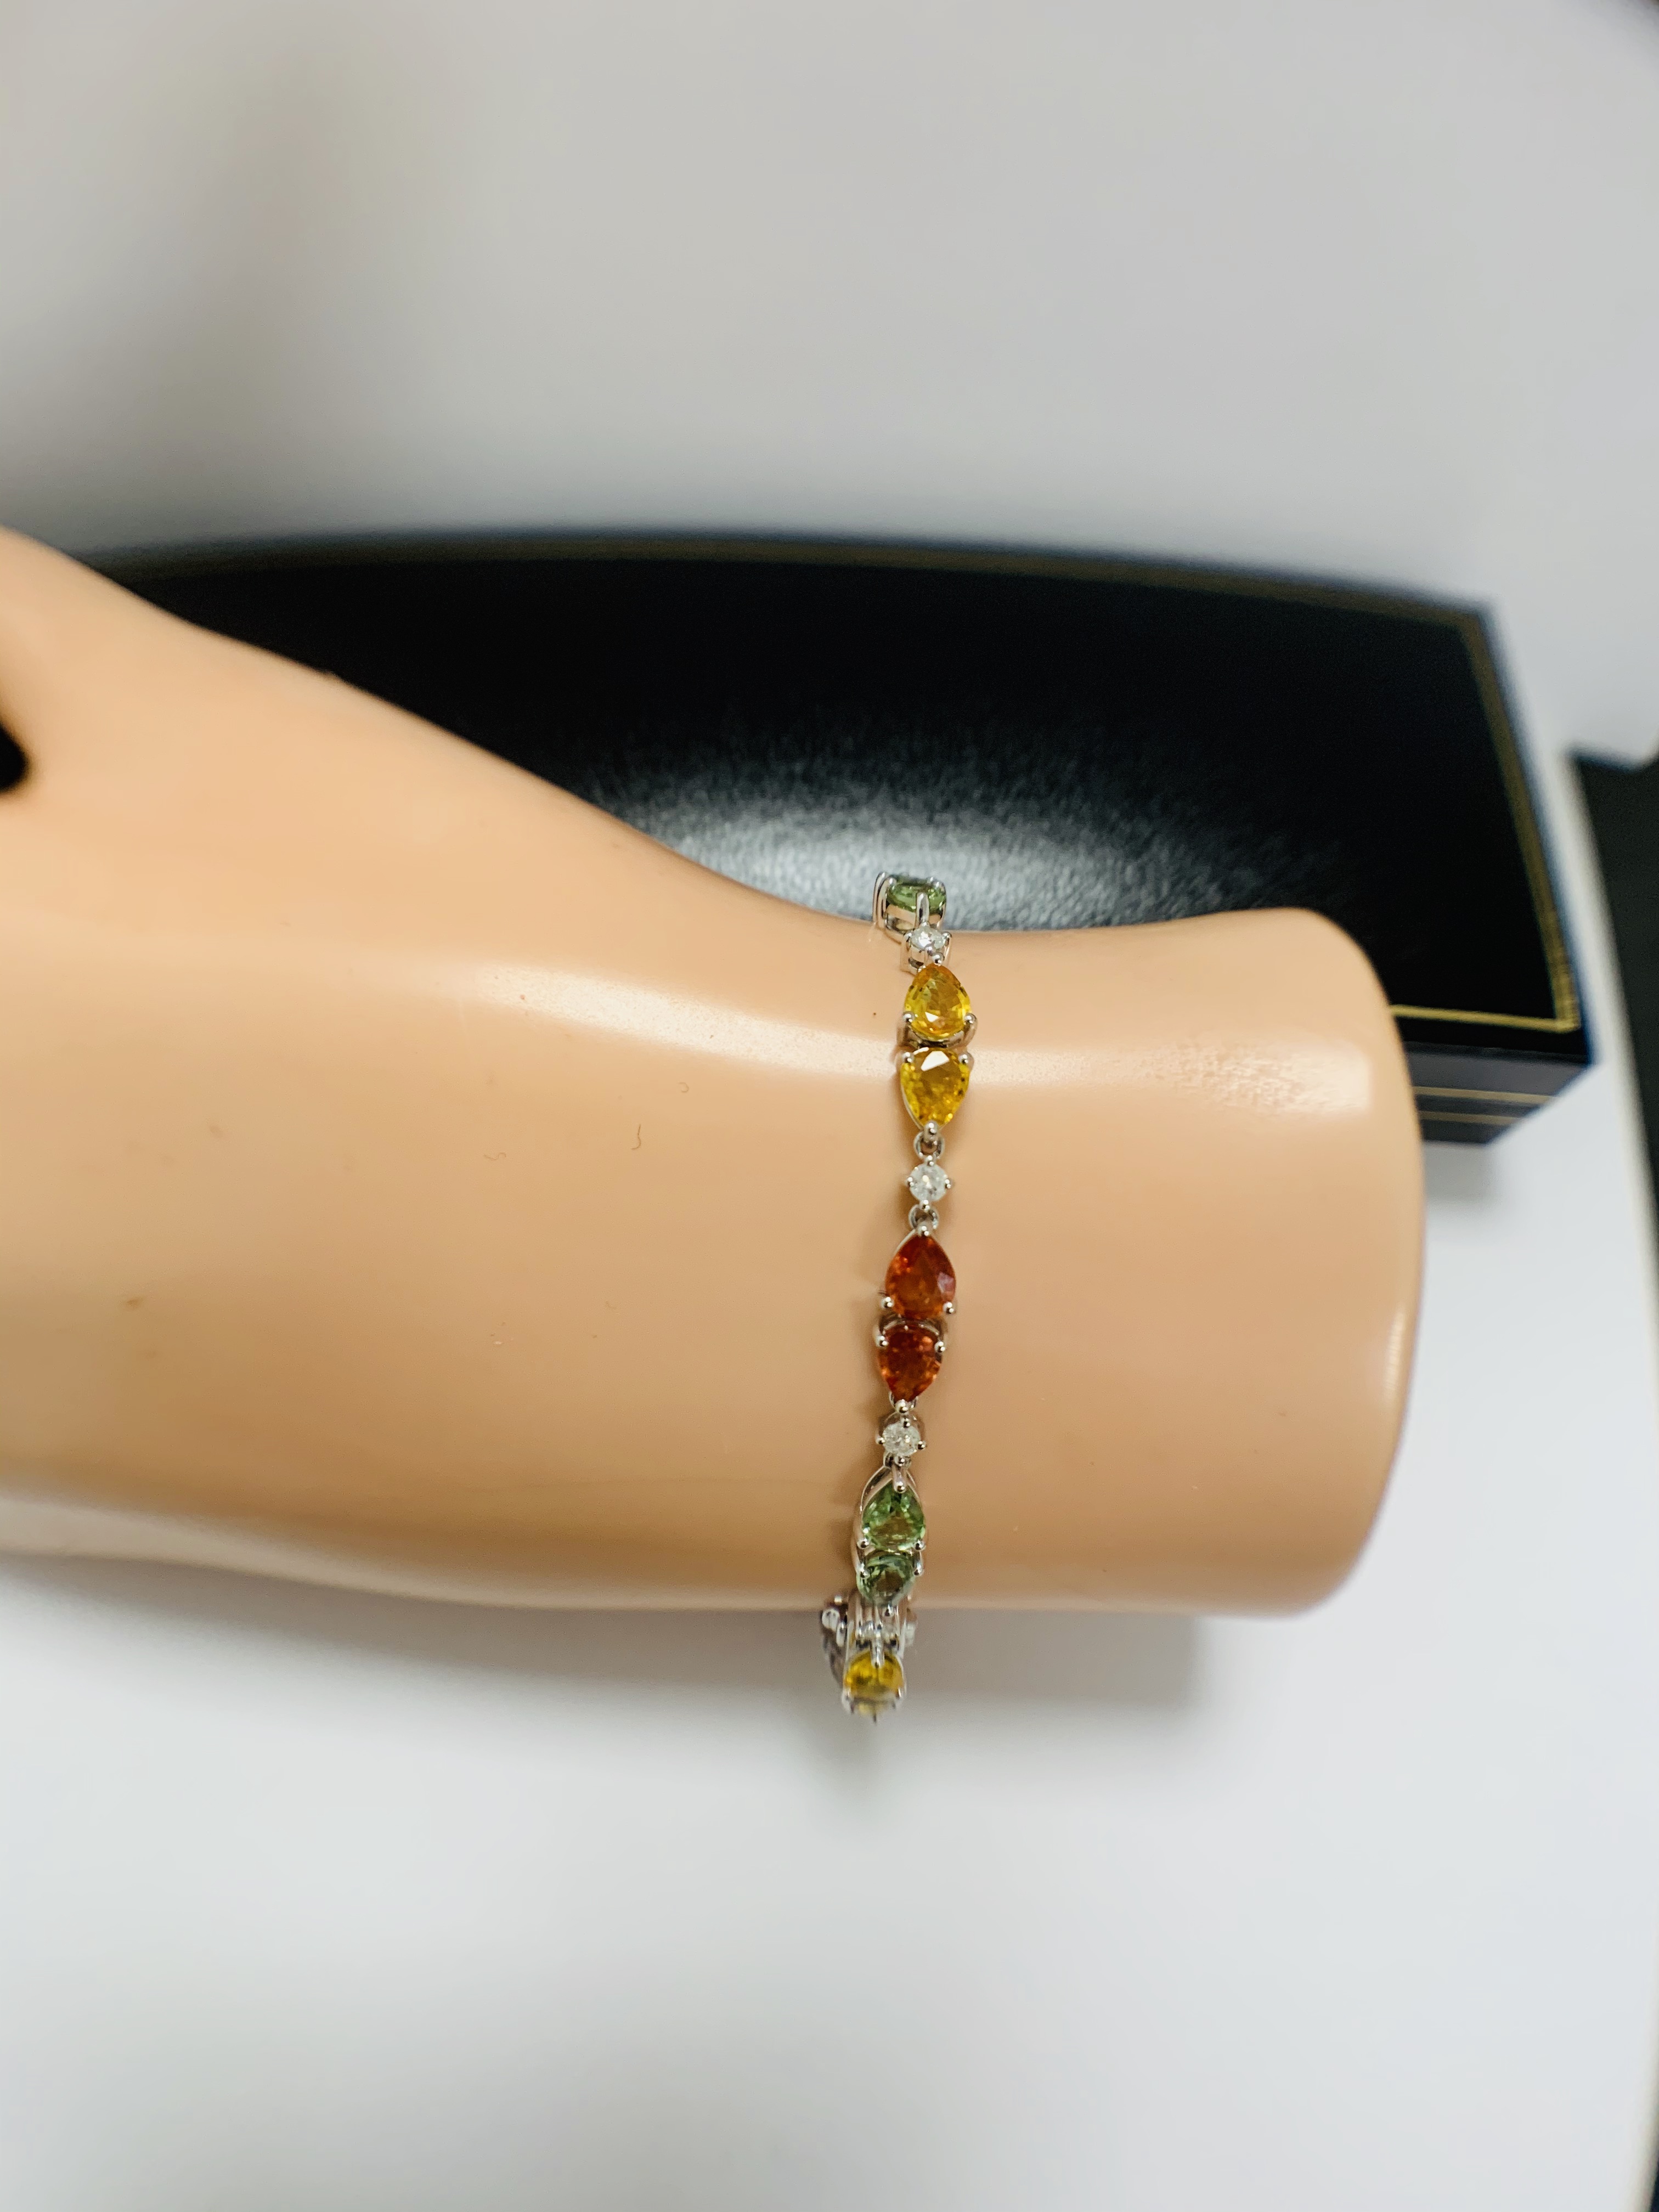 14ct White Gold Sapphire and Diamond bracelet featuring, 22 pear cut, yellow, green and orange Sapph - Image 23 of 24